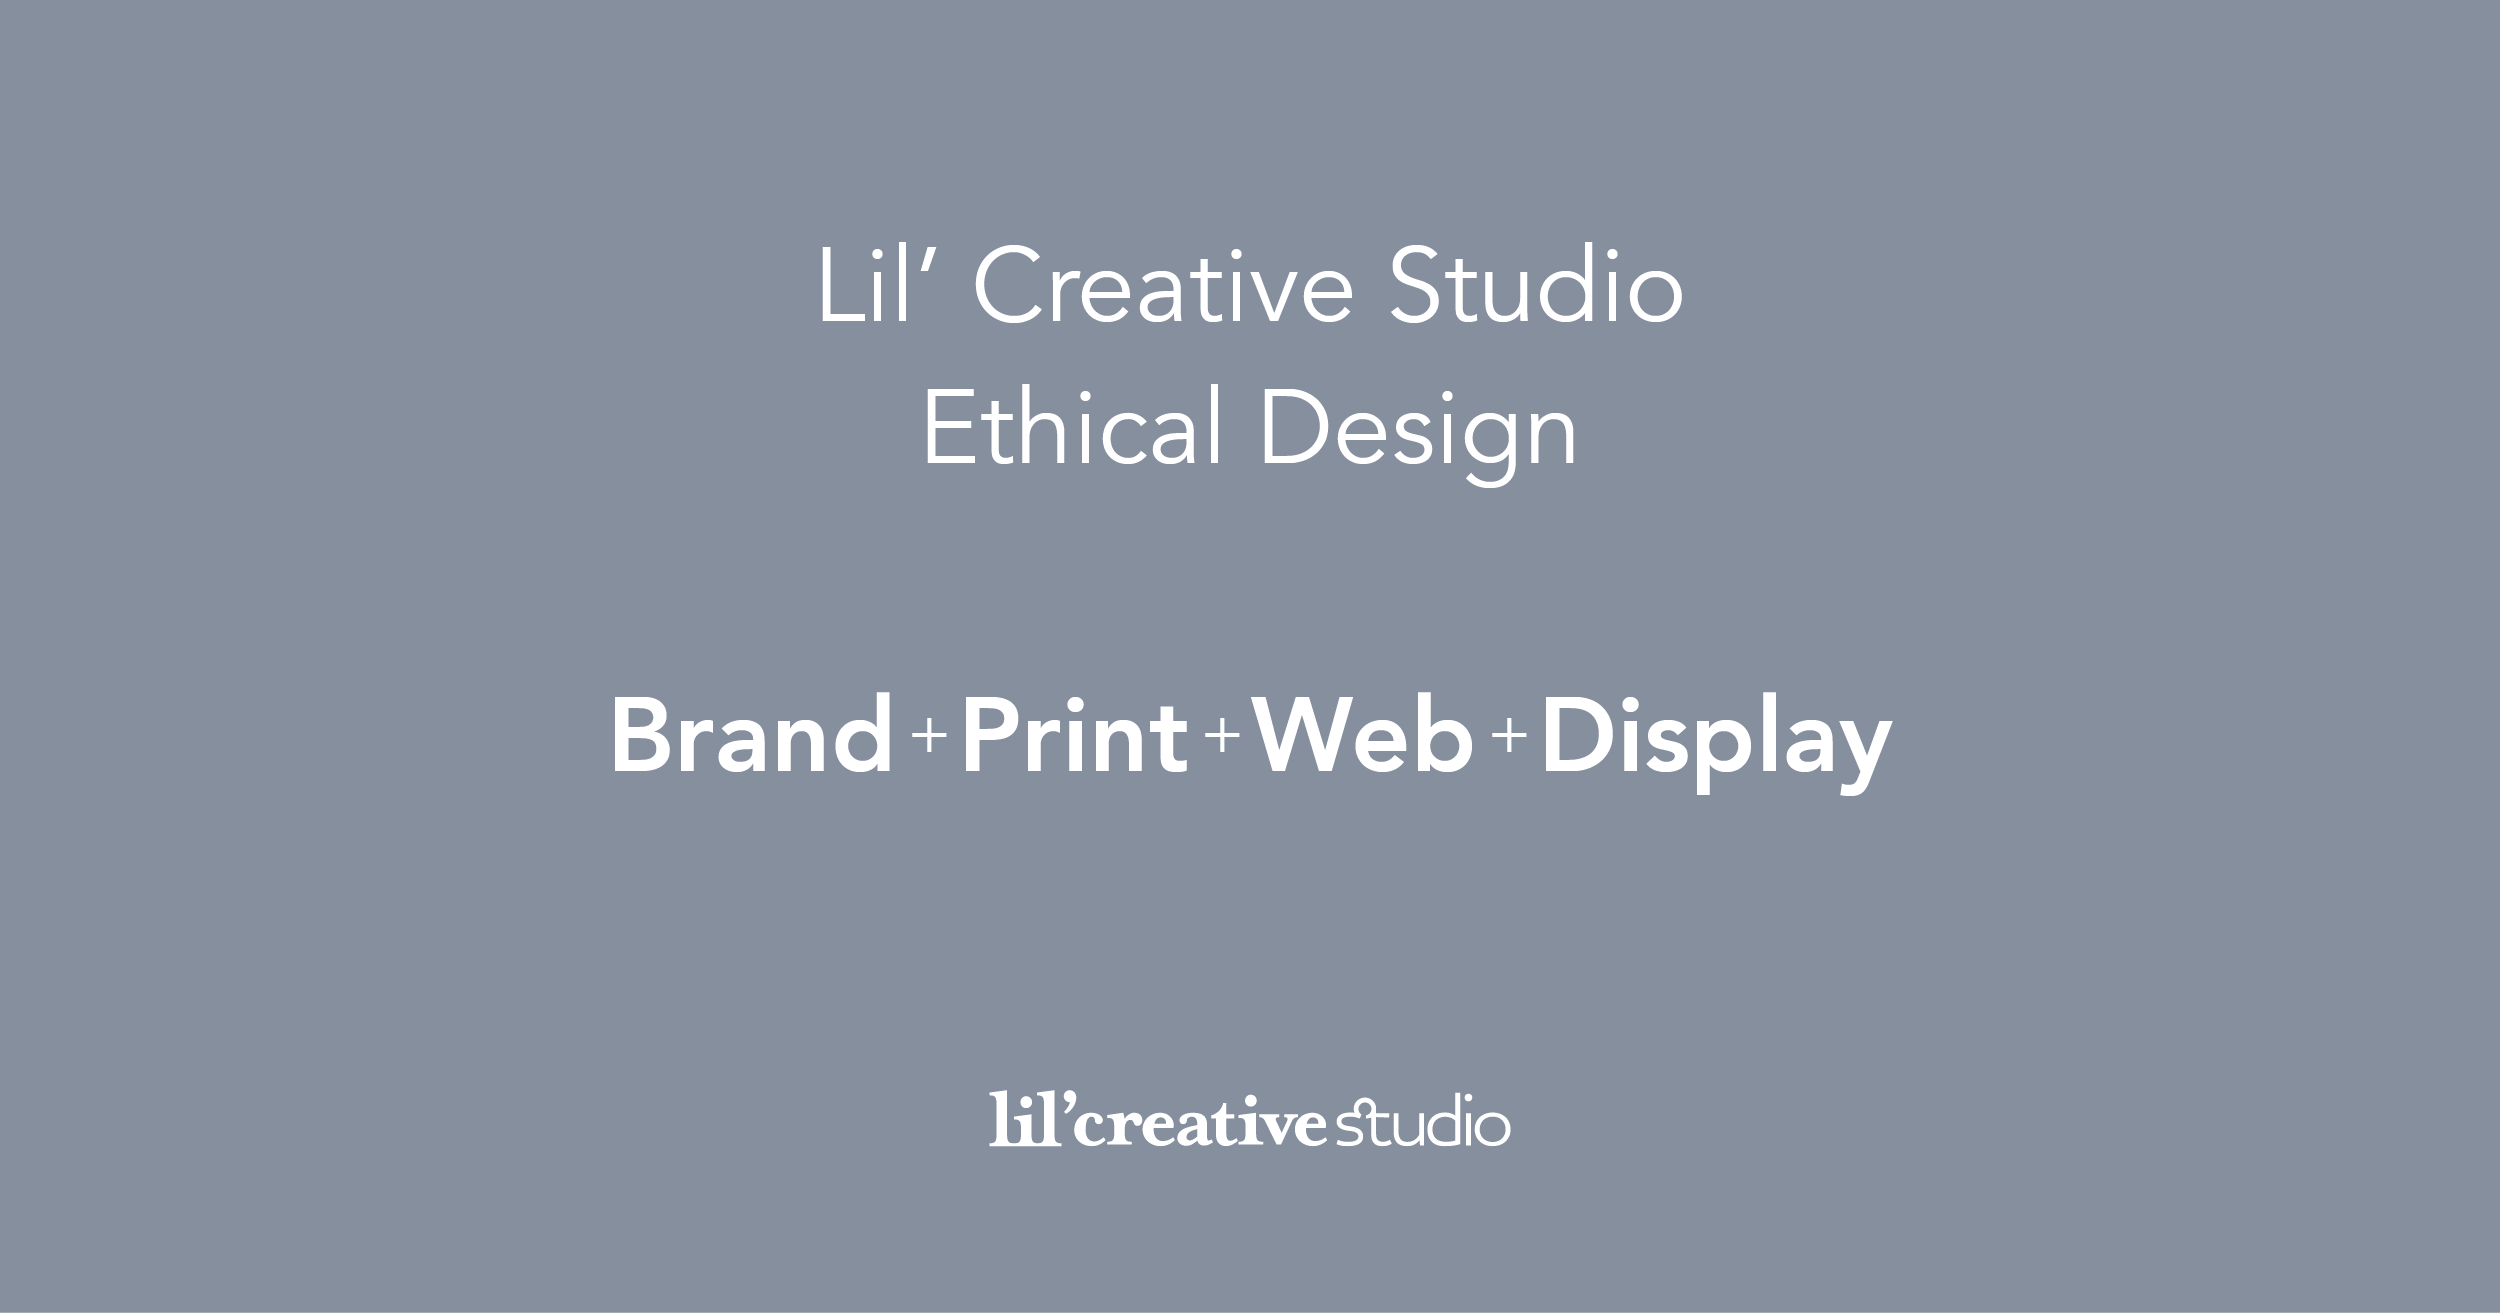 Lil Creative Studio About graphic with brand name and services